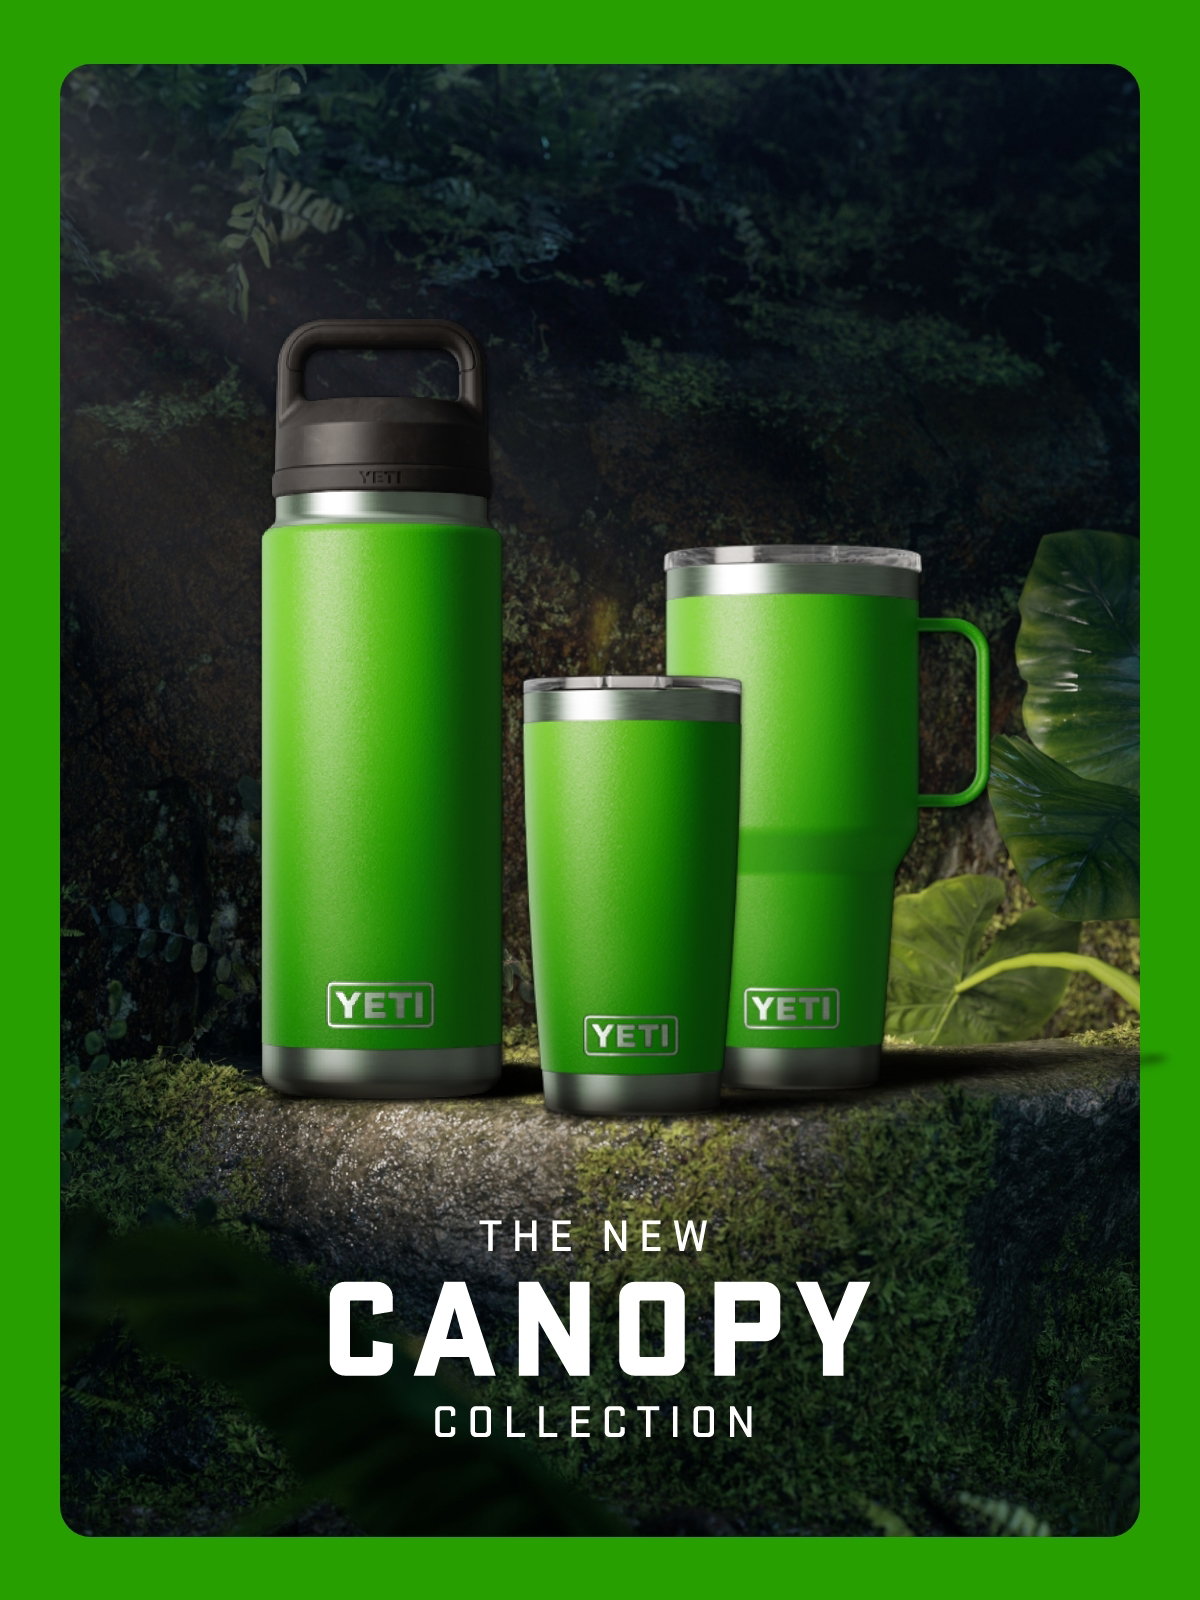 Yeti Canopy green Bottles Set Of Two